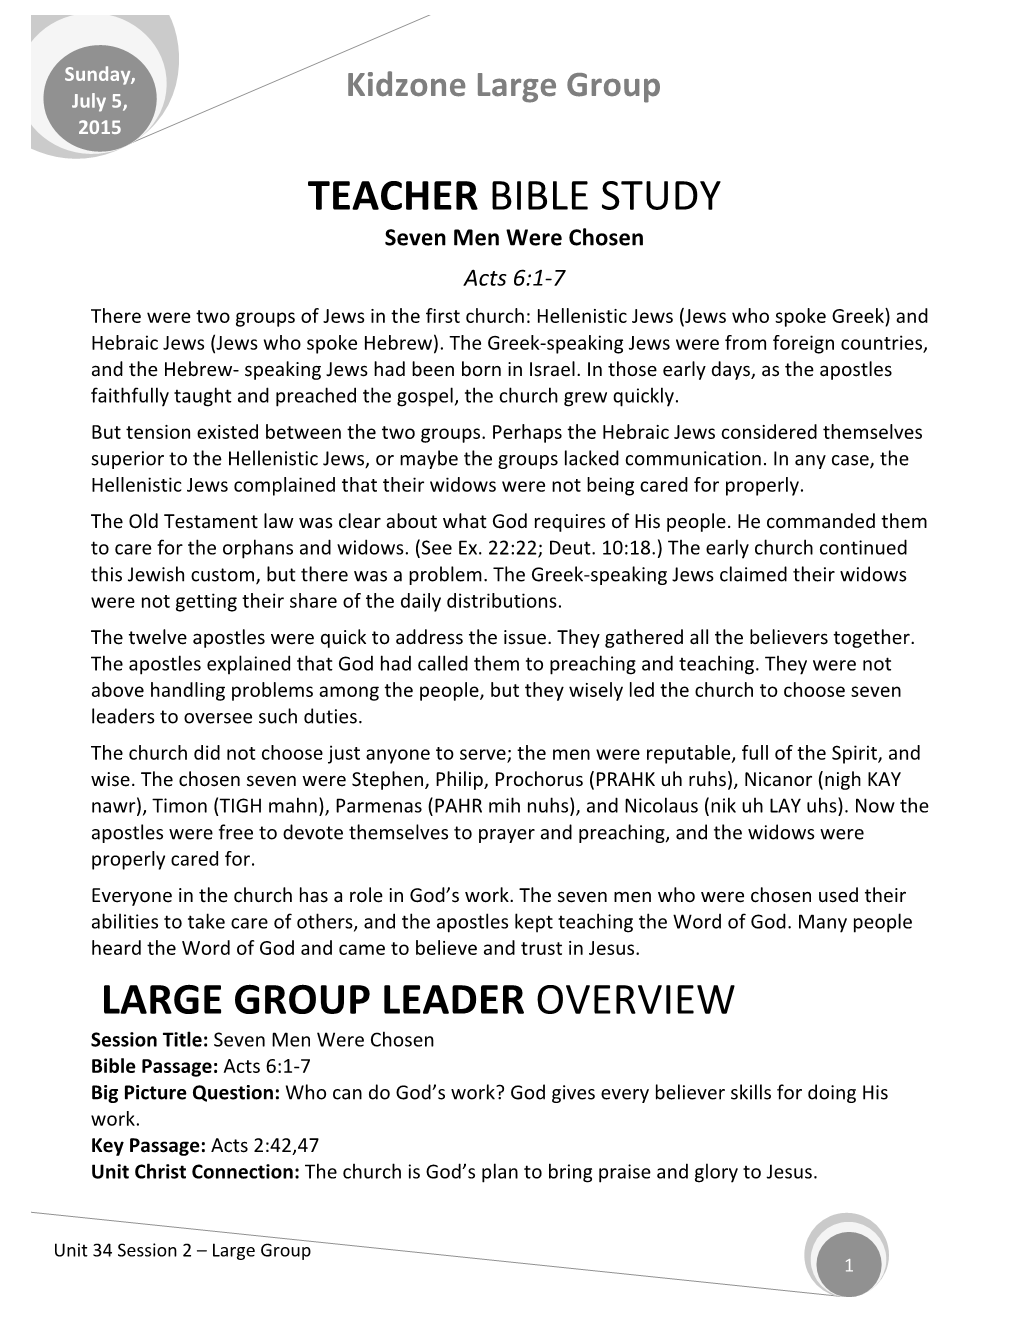 Teacher Bible Study Large Group Leader Overview